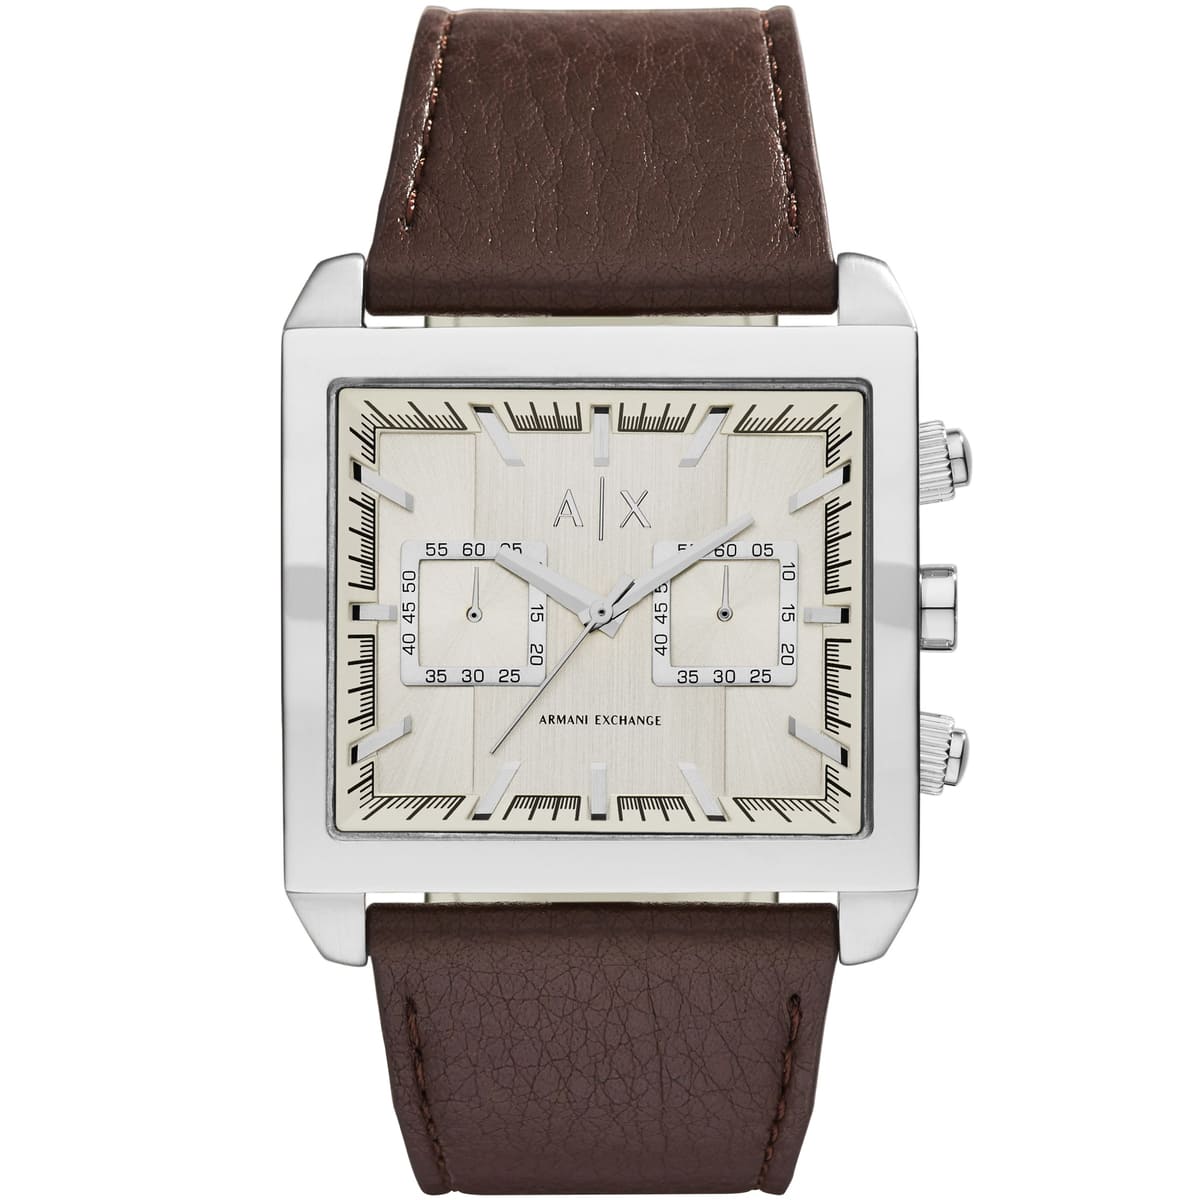 Armani Exchange Square Watch Online Collection, Save 41% 